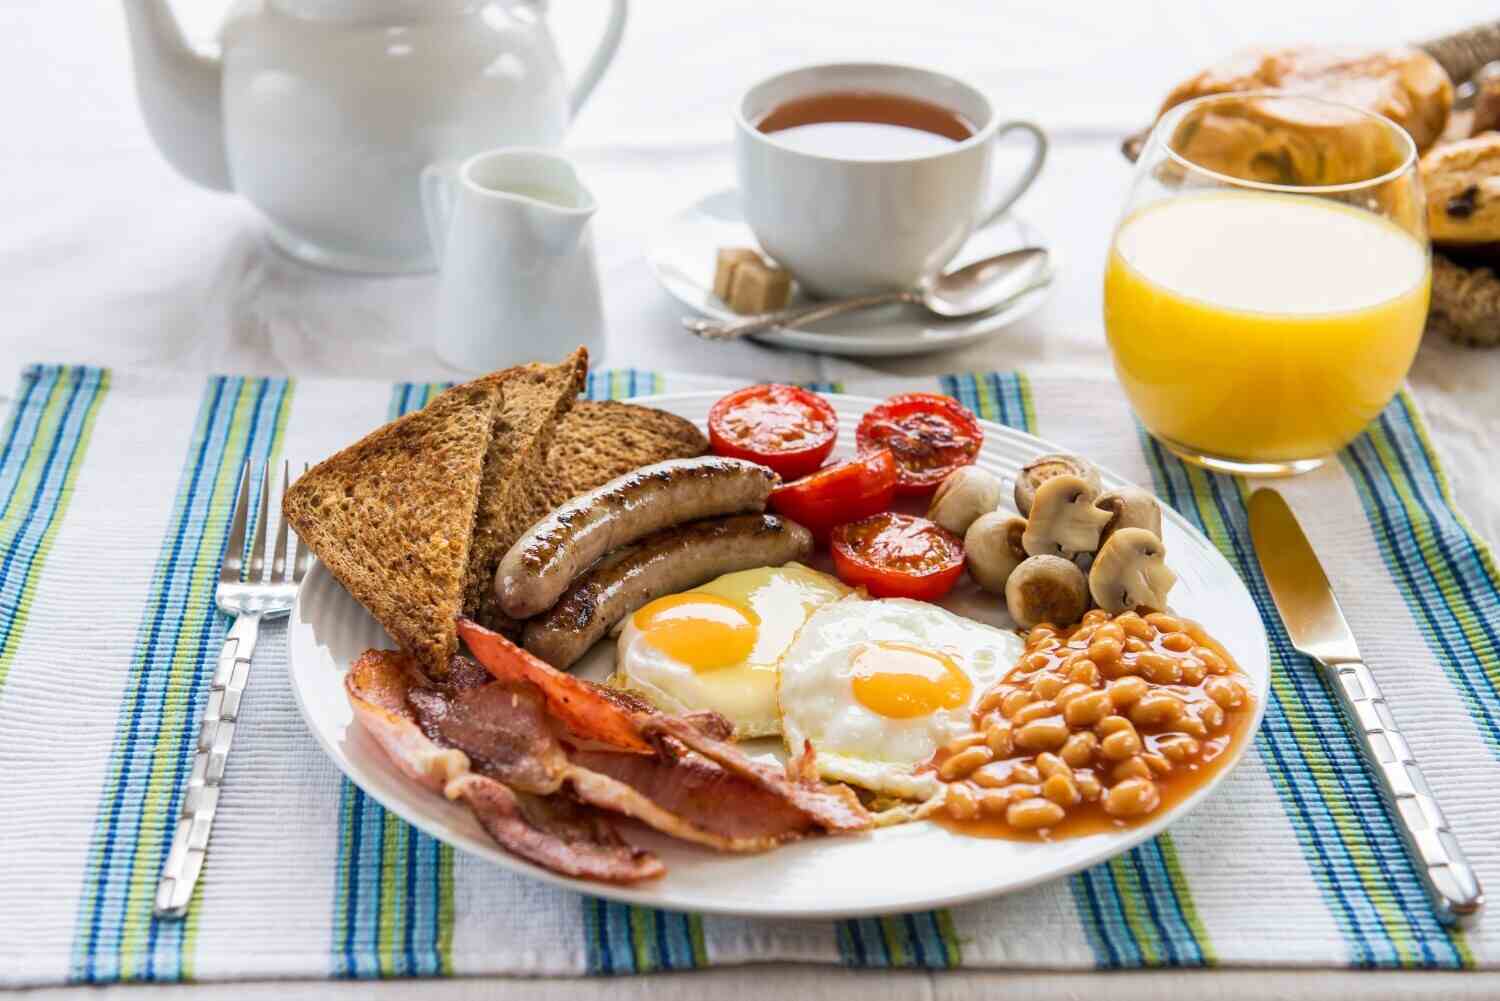 Your MK guide to the best breakfast in Kolkata cafes